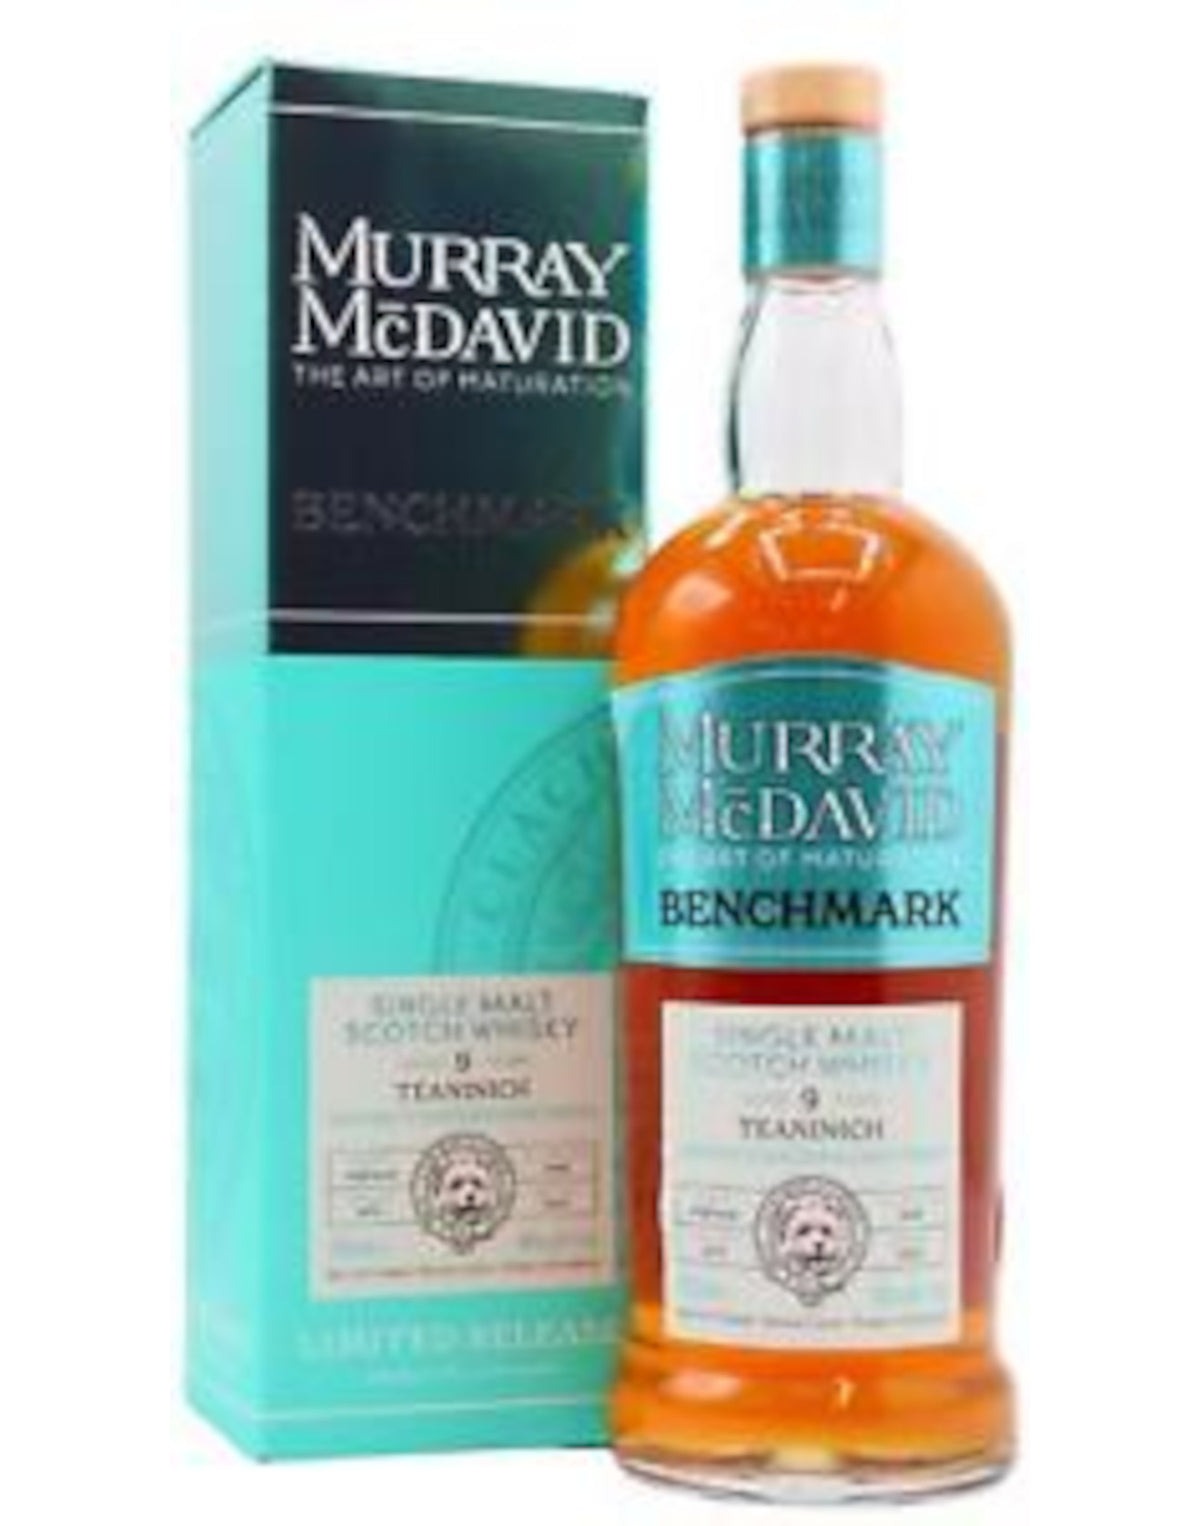 Murray McDavid Benchmark Teaninich Madeira Wine Cask Matured 2012 9 year old Whisky